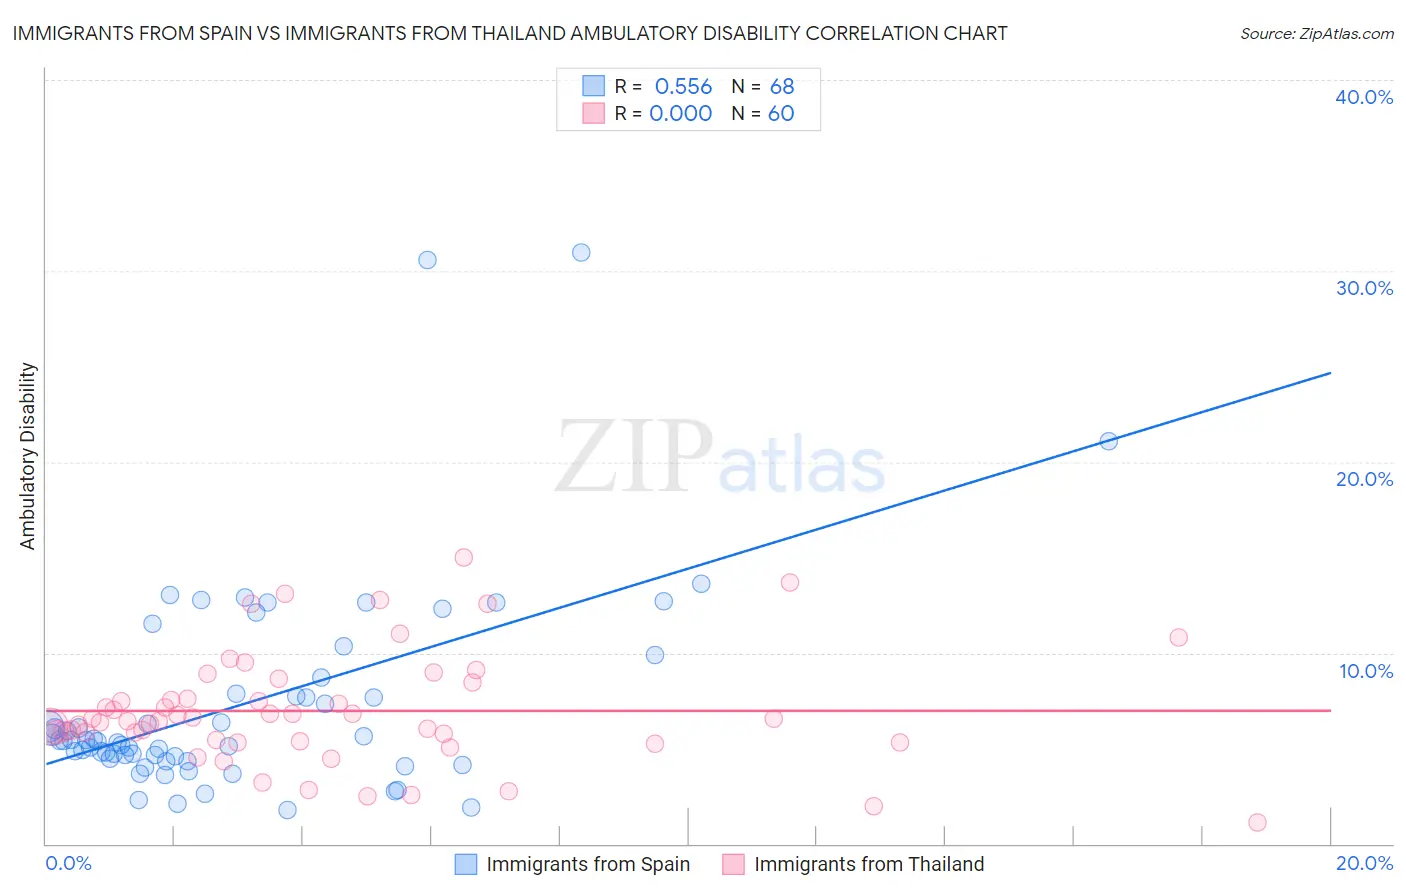 Immigrants from Spain vs Immigrants from Thailand Ambulatory Disability